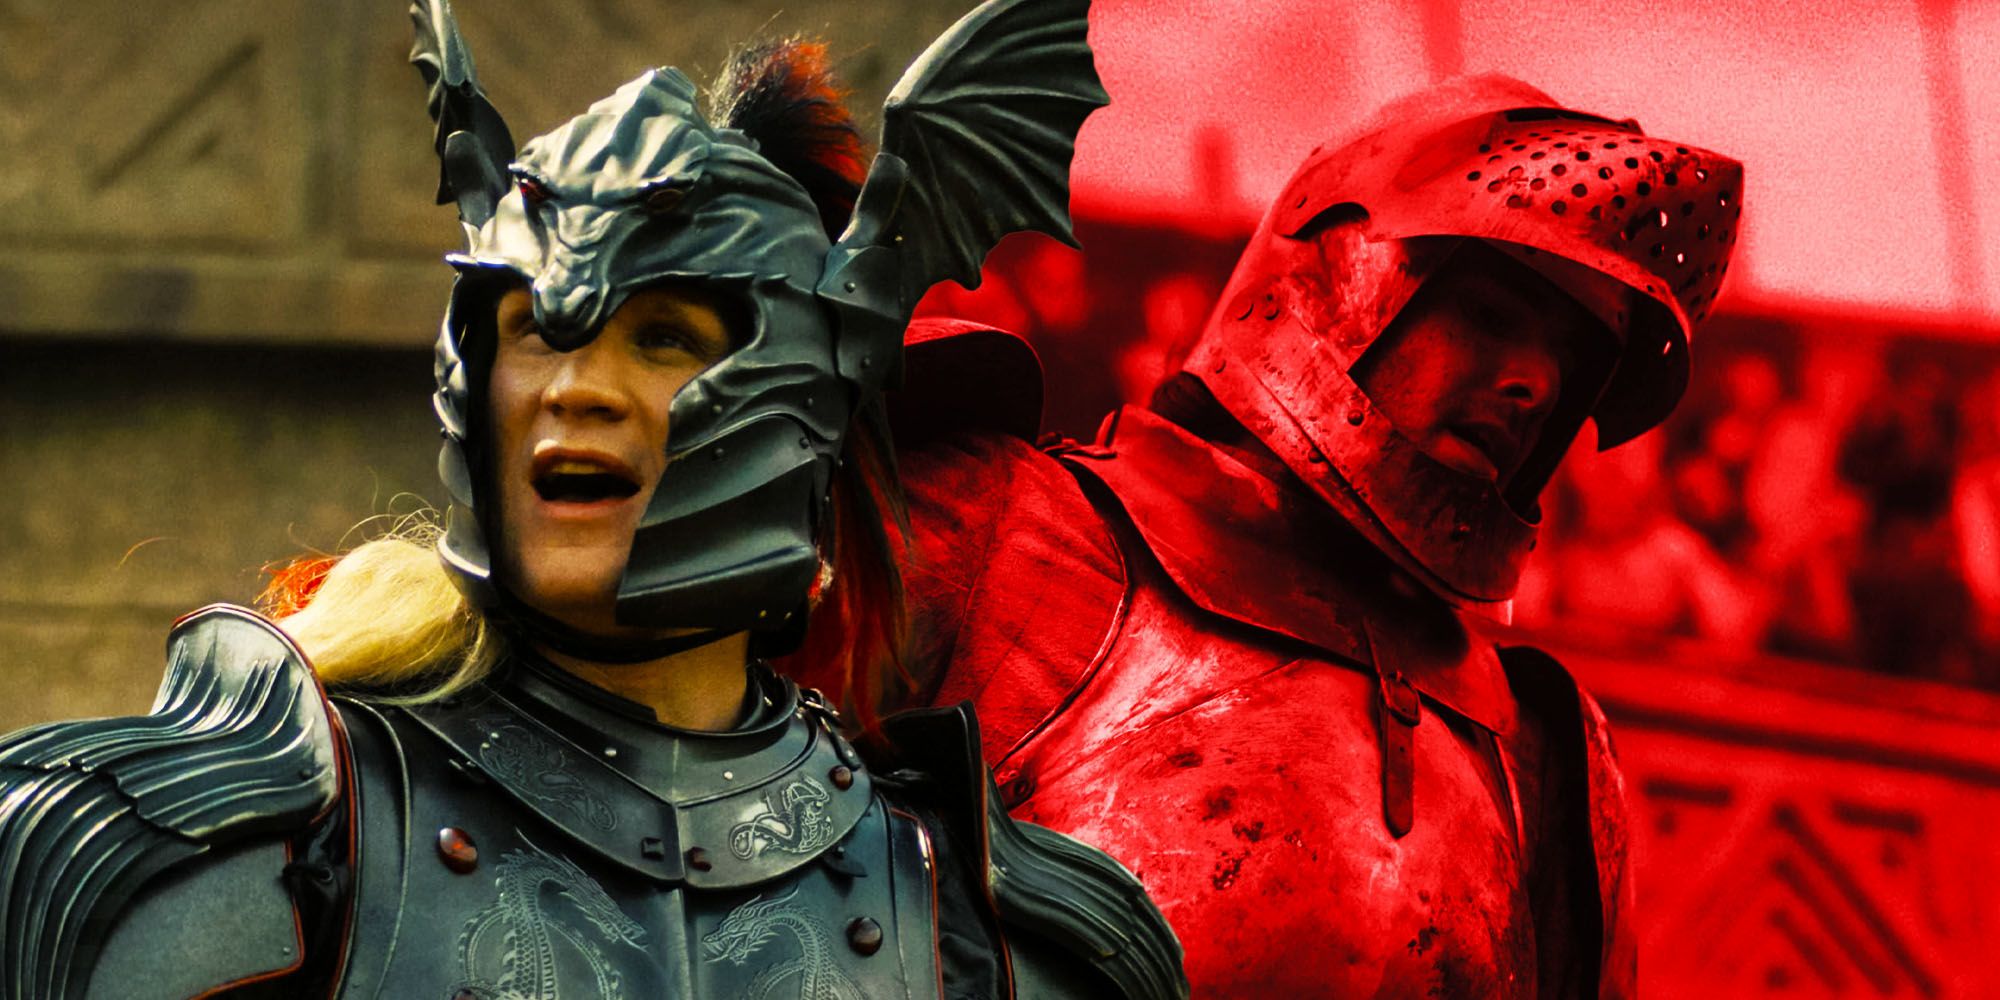 HOTD: 10 GoT Characters Who Can Defeat Daemon Targaryen In A Trial By Combat